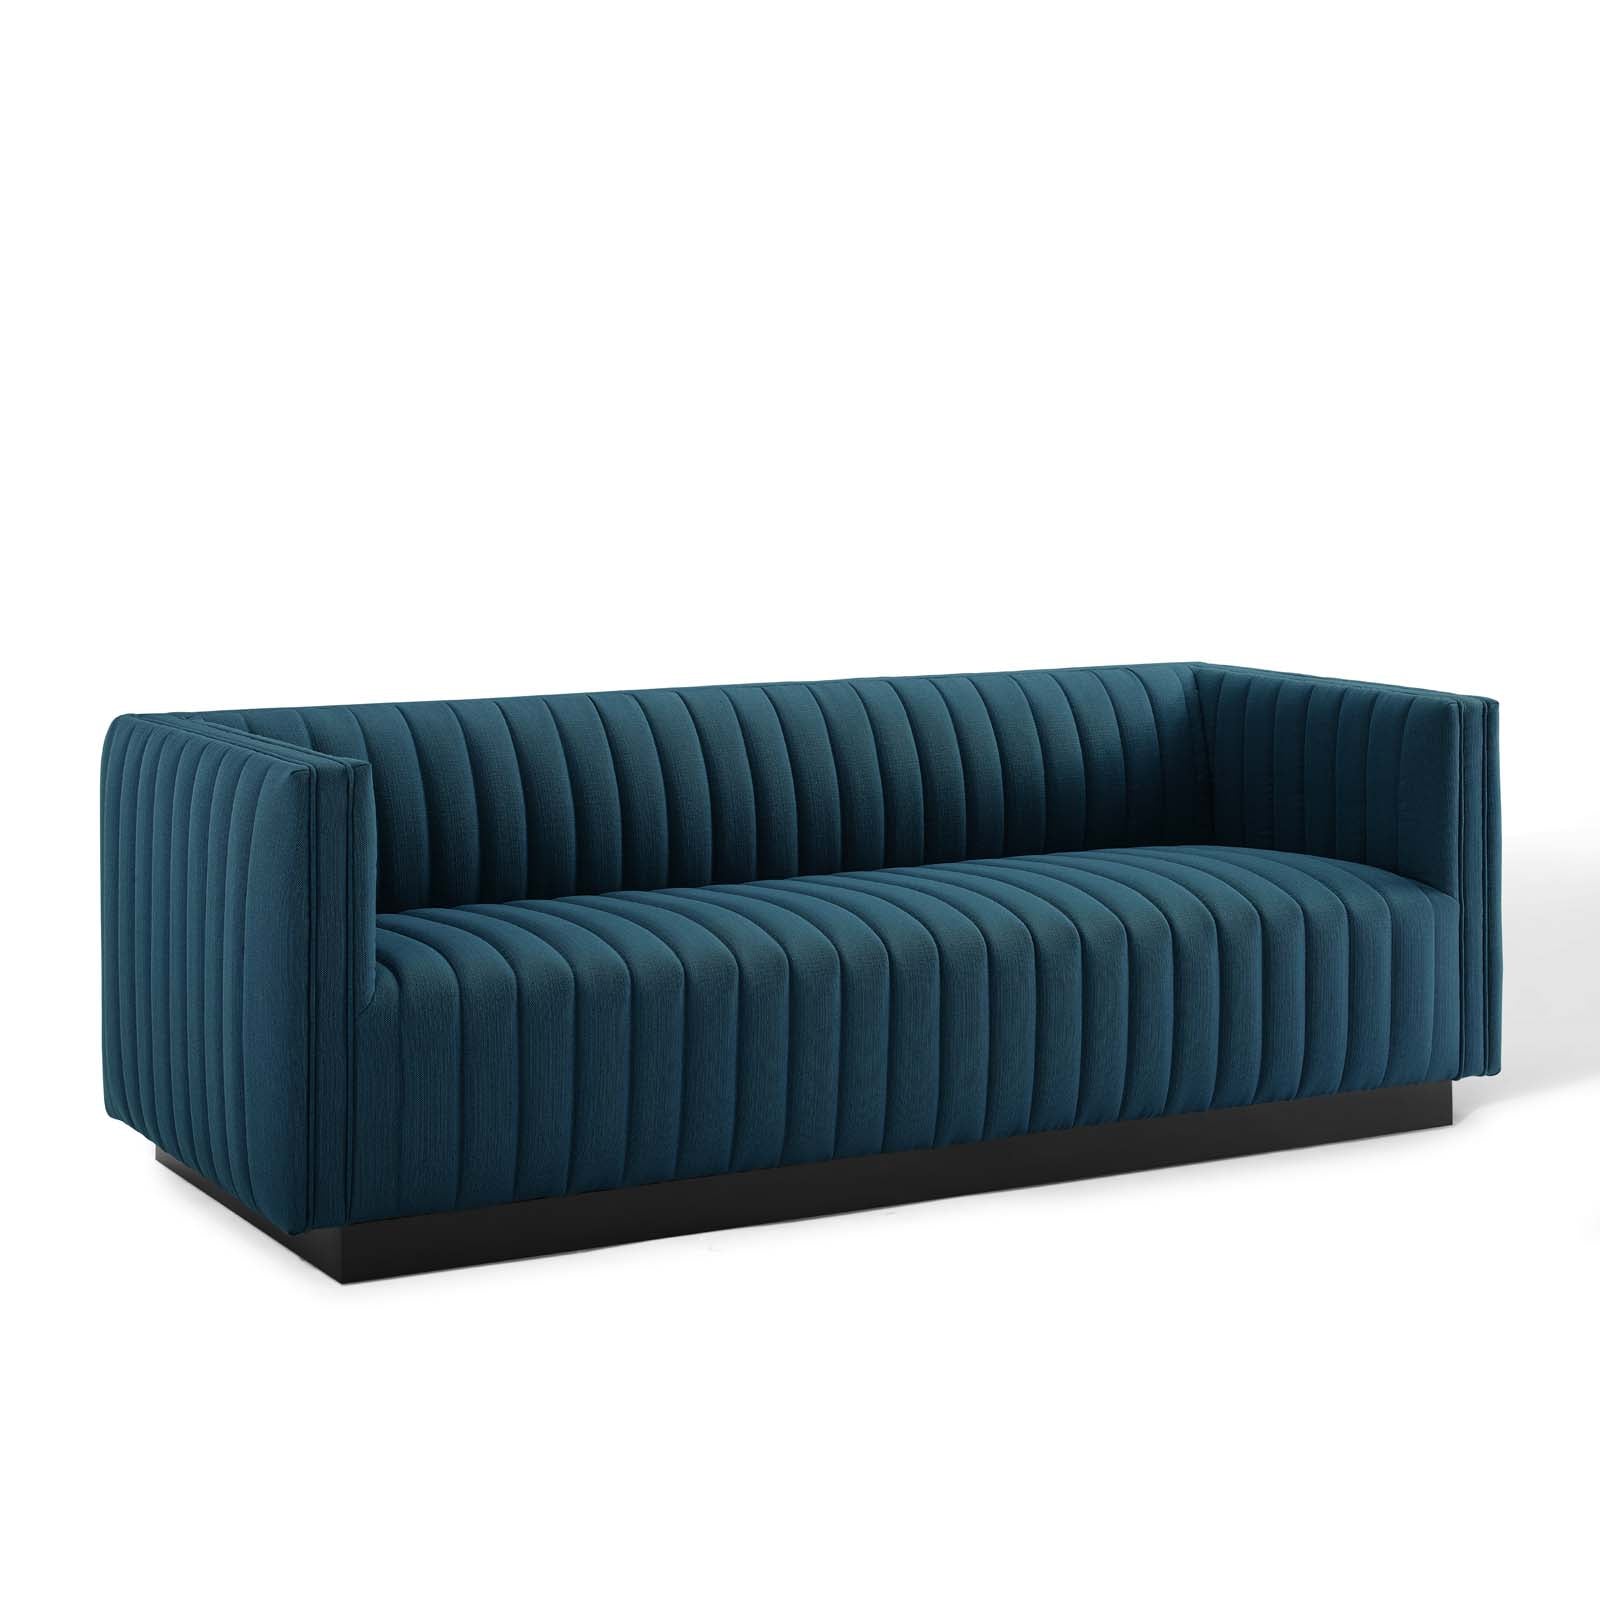 Conjure Tufted Upholstered Fabric Sofa - East Shore Modern Home Furnishings